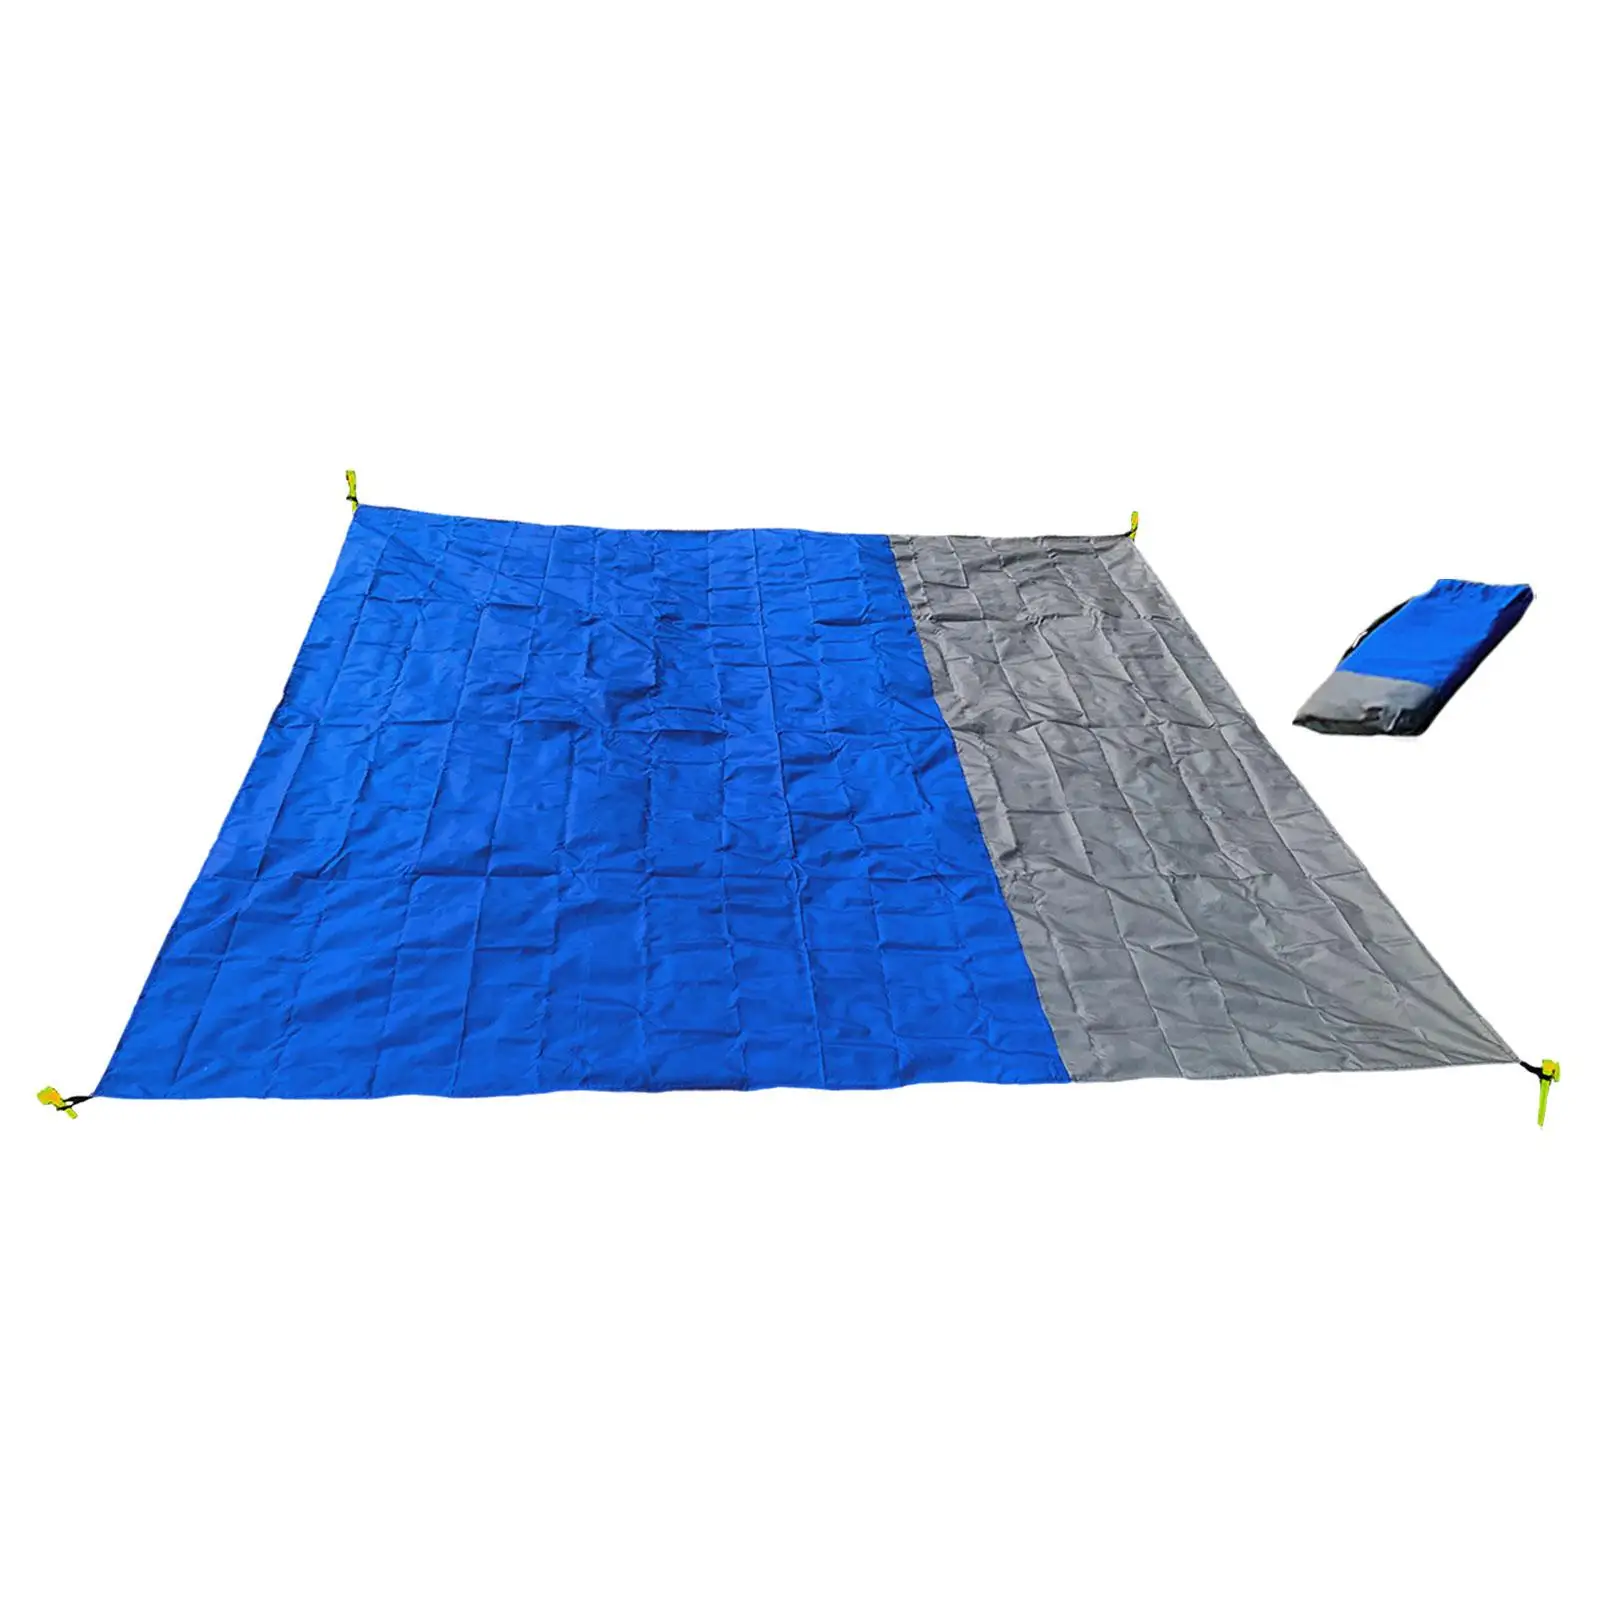 Picnic Blanket Lightweight Compact Beach Blanket for Park Backpacking Hiking